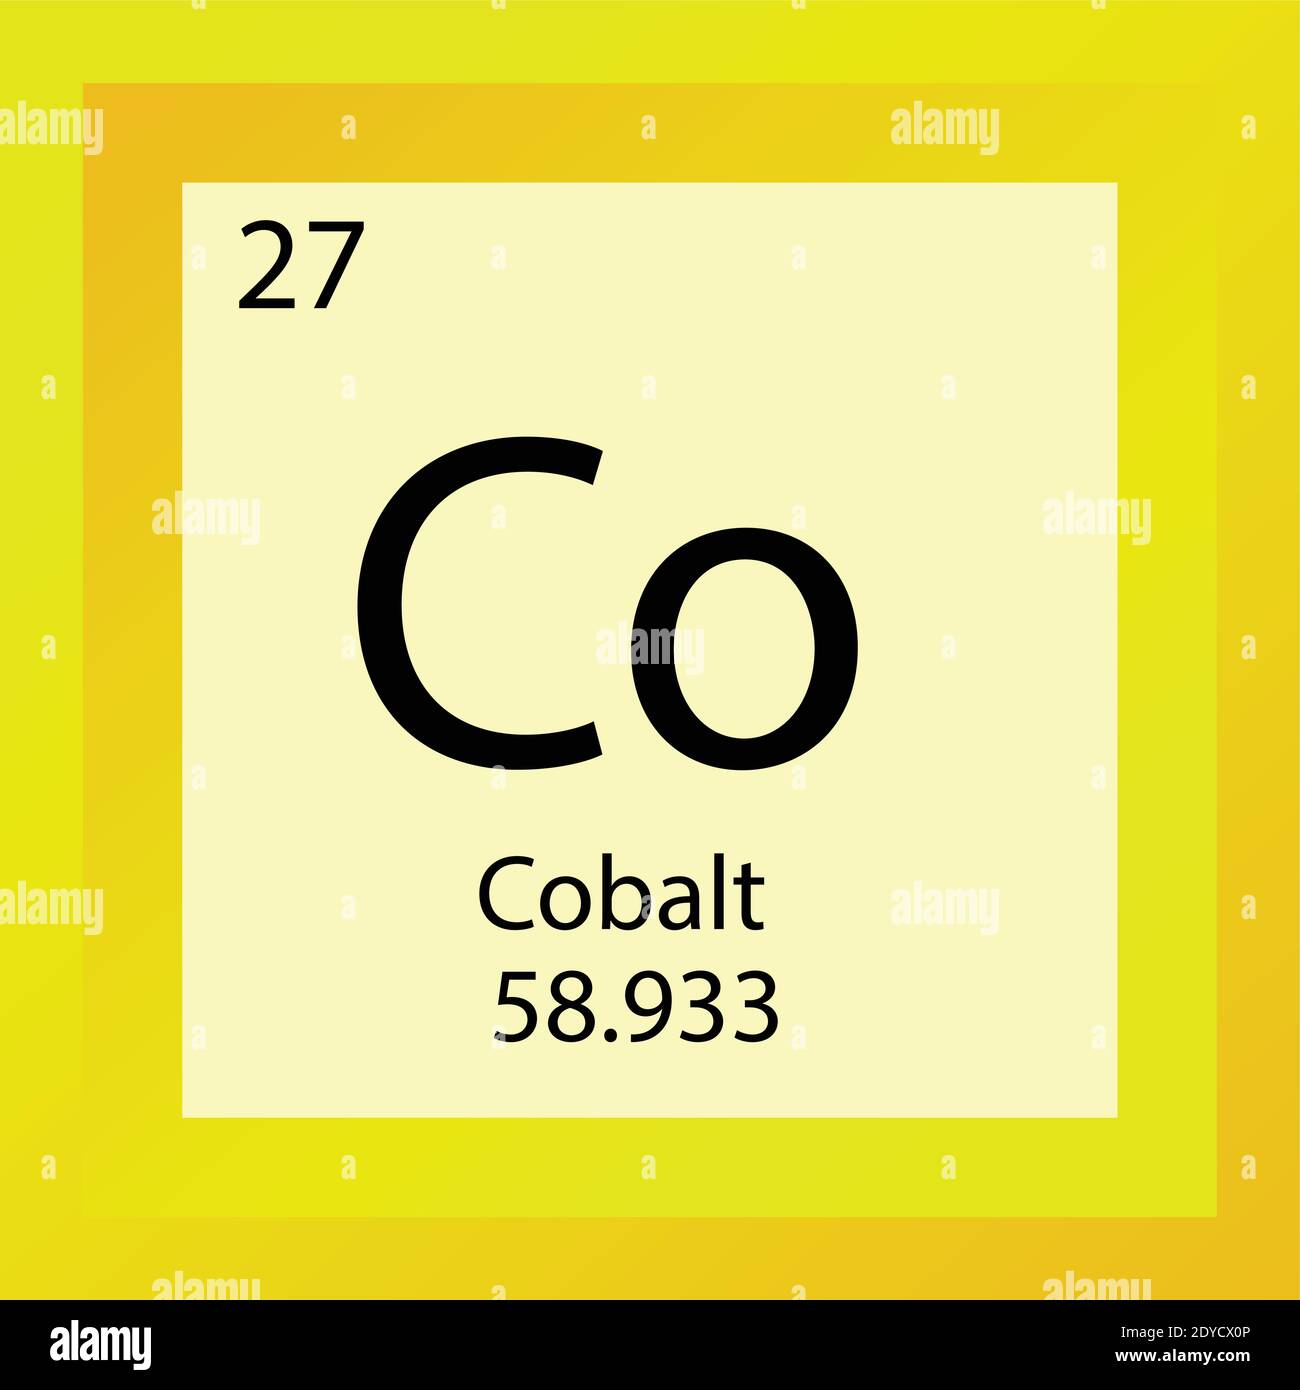 Co Cobalt Chemical Element Periodic Table. Single element vector illustration, transition metals element icon with molar mass and atomic number. Stock Vector